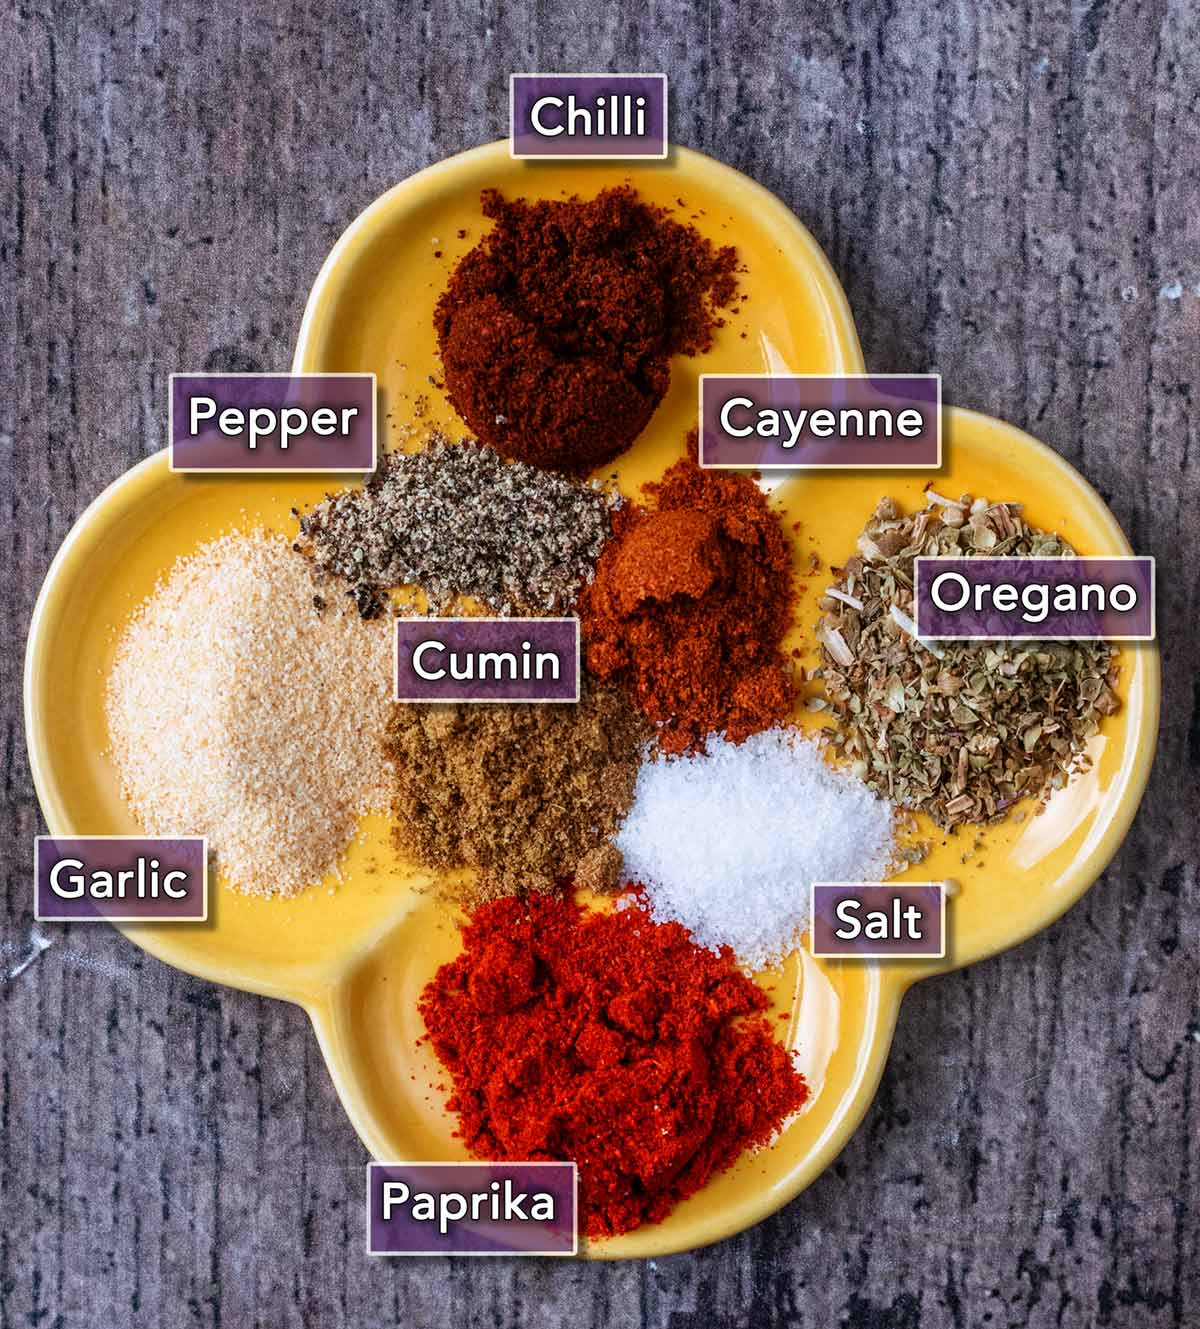 Eight herbs and spices on a yellow plate, each with a text overlay label.